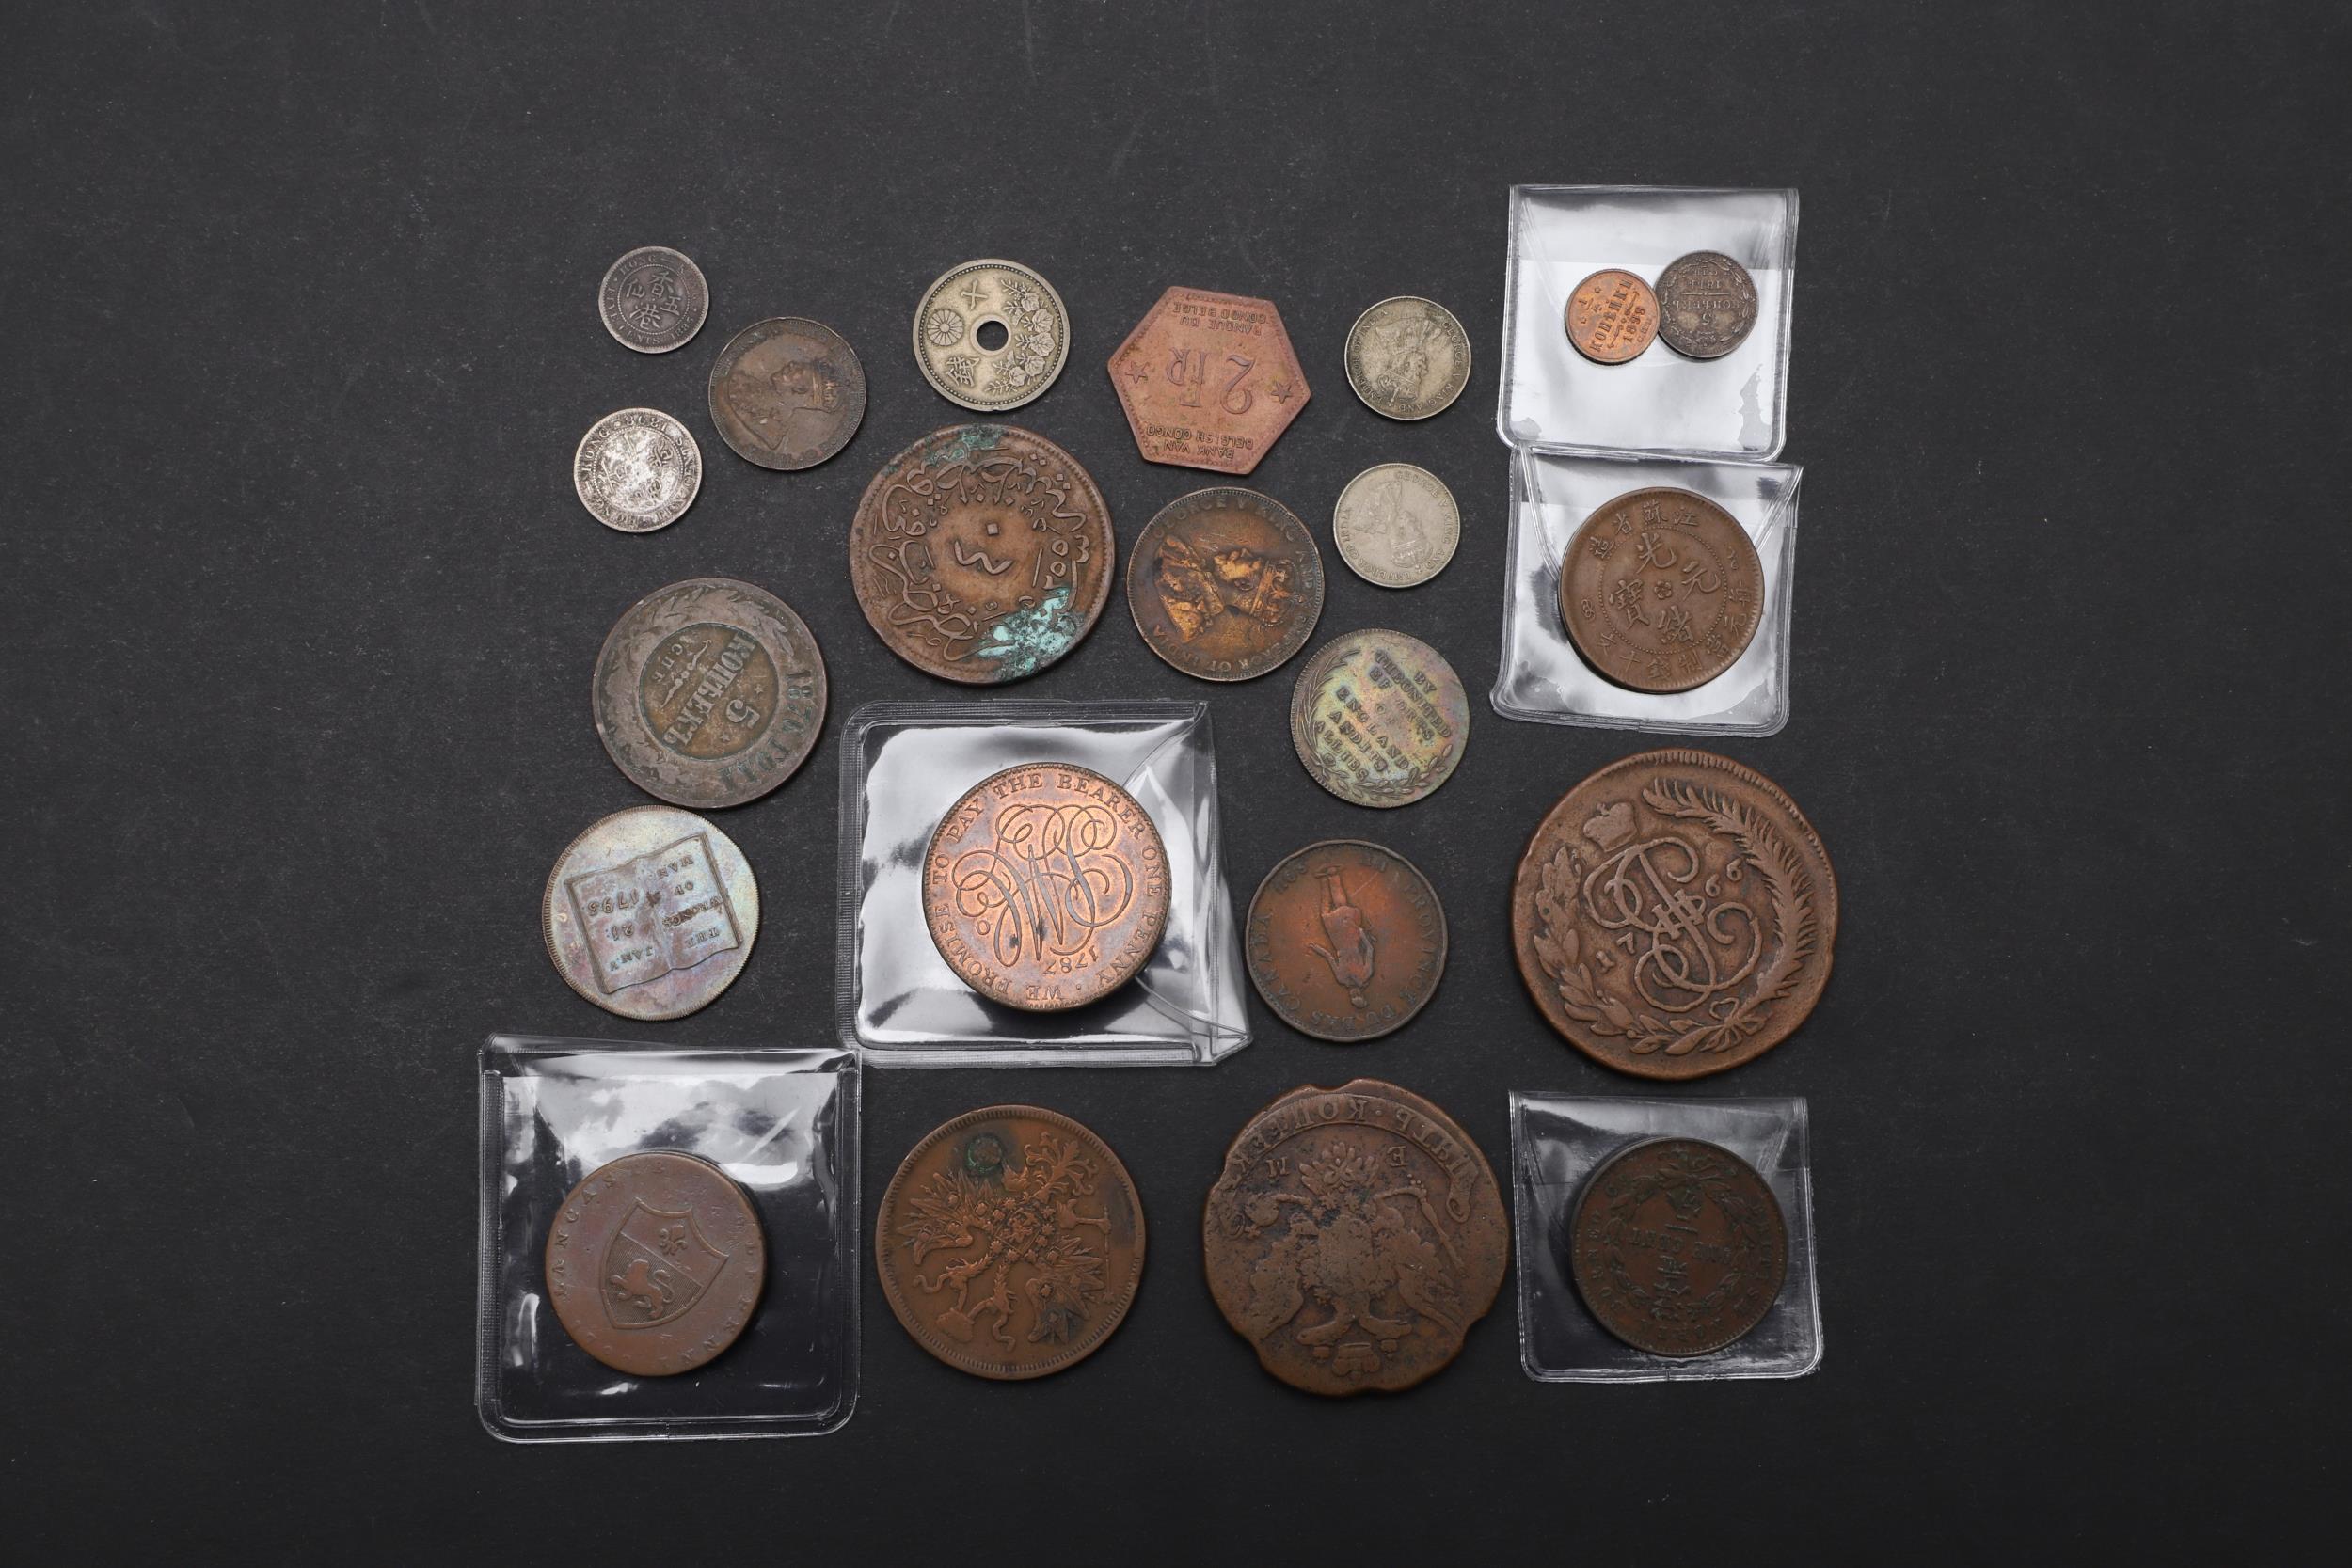 A SMALL COLLECTION OF RUSSIAN COINS. - Image 6 of 7